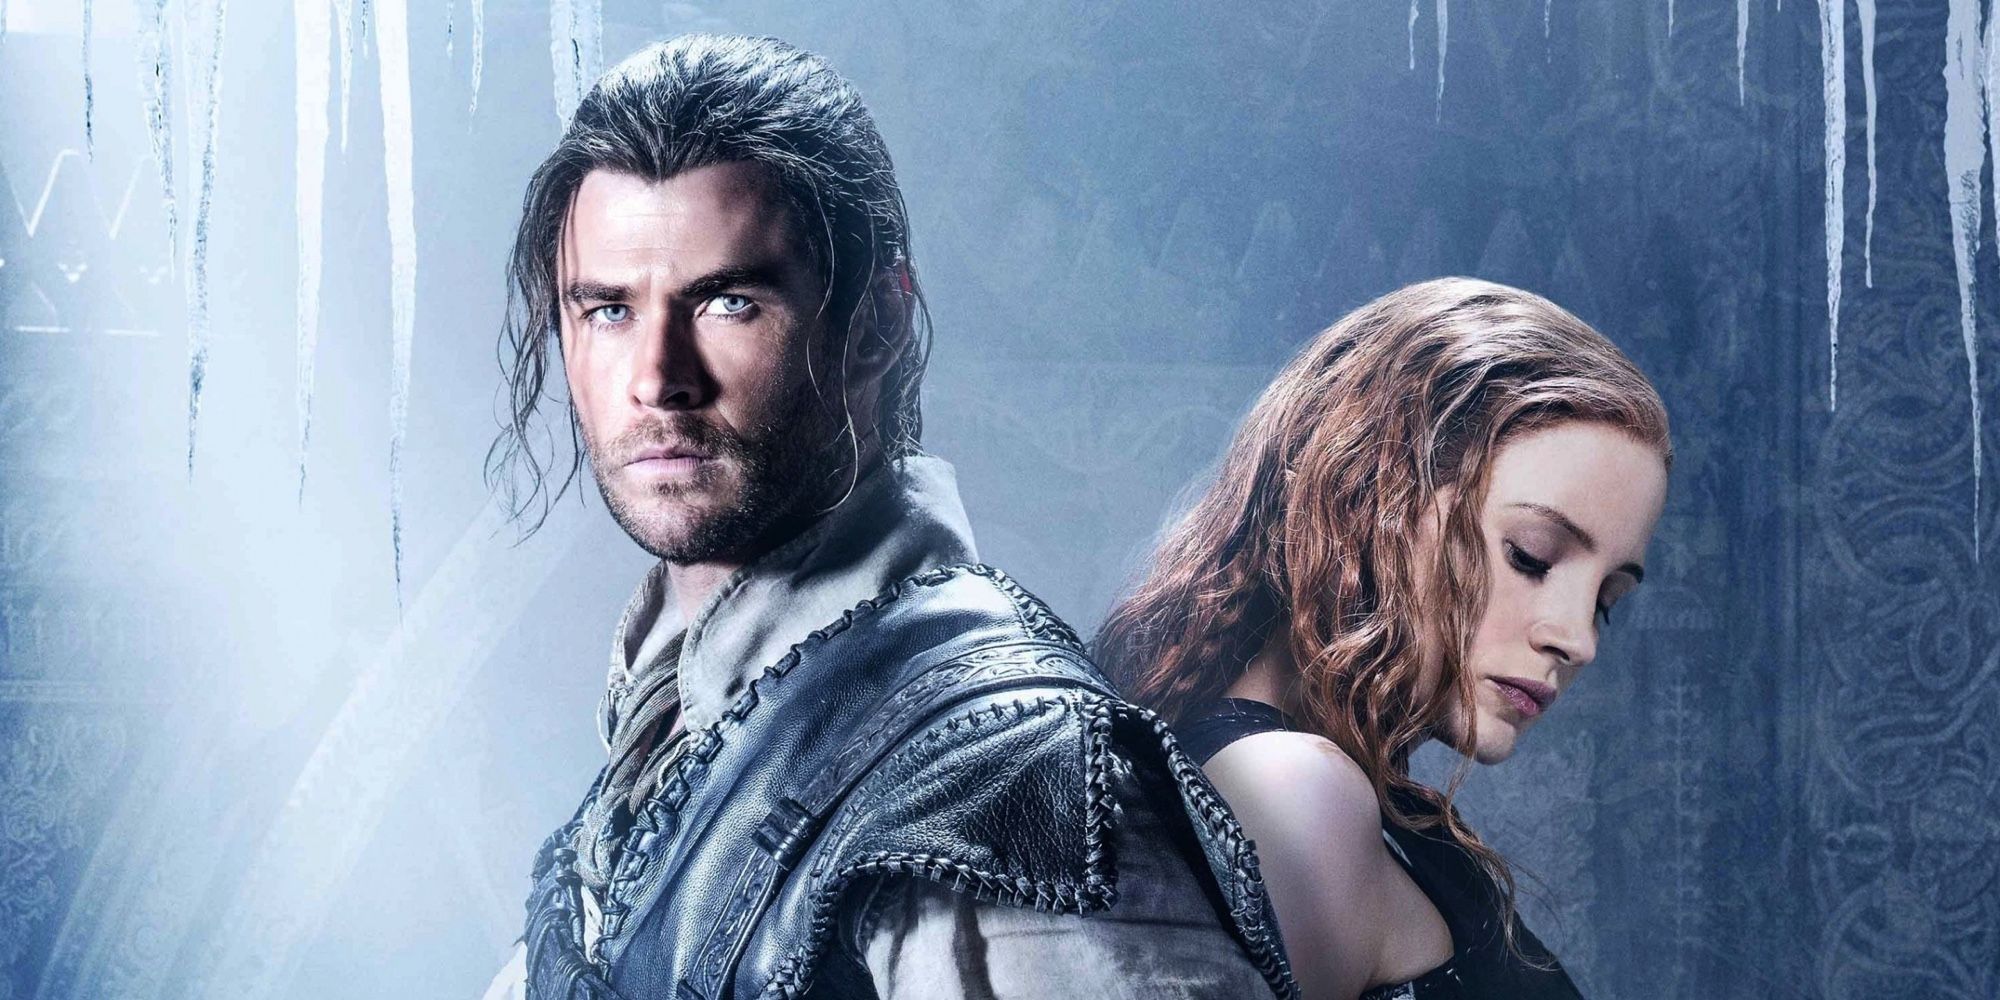 Chris Hemsworth and Jessica Chastain as Eric and Sara in The Hunstman: Winter's War